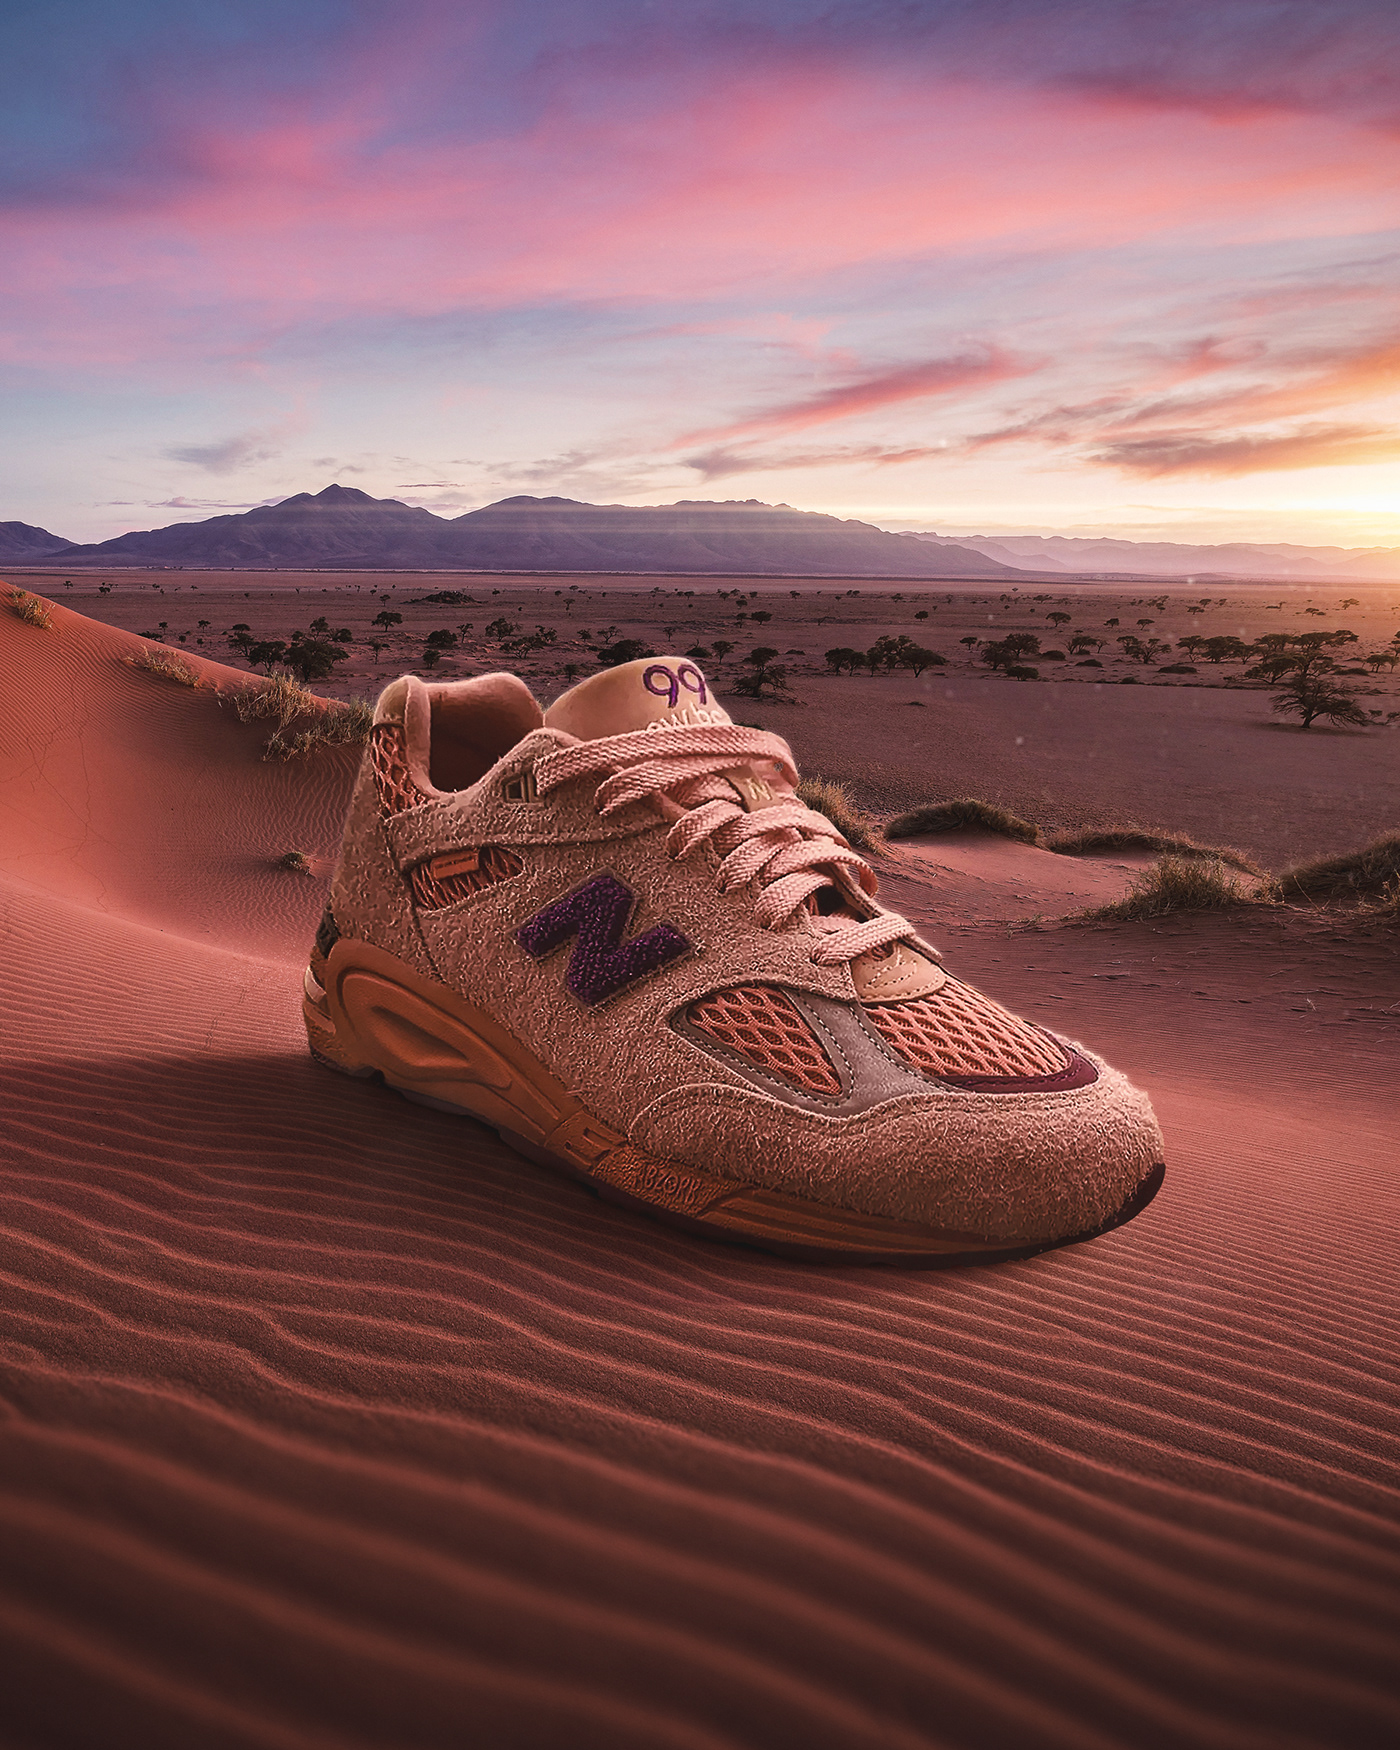 Giant sneaker photo composite in the desert . Retouching using Photoshop